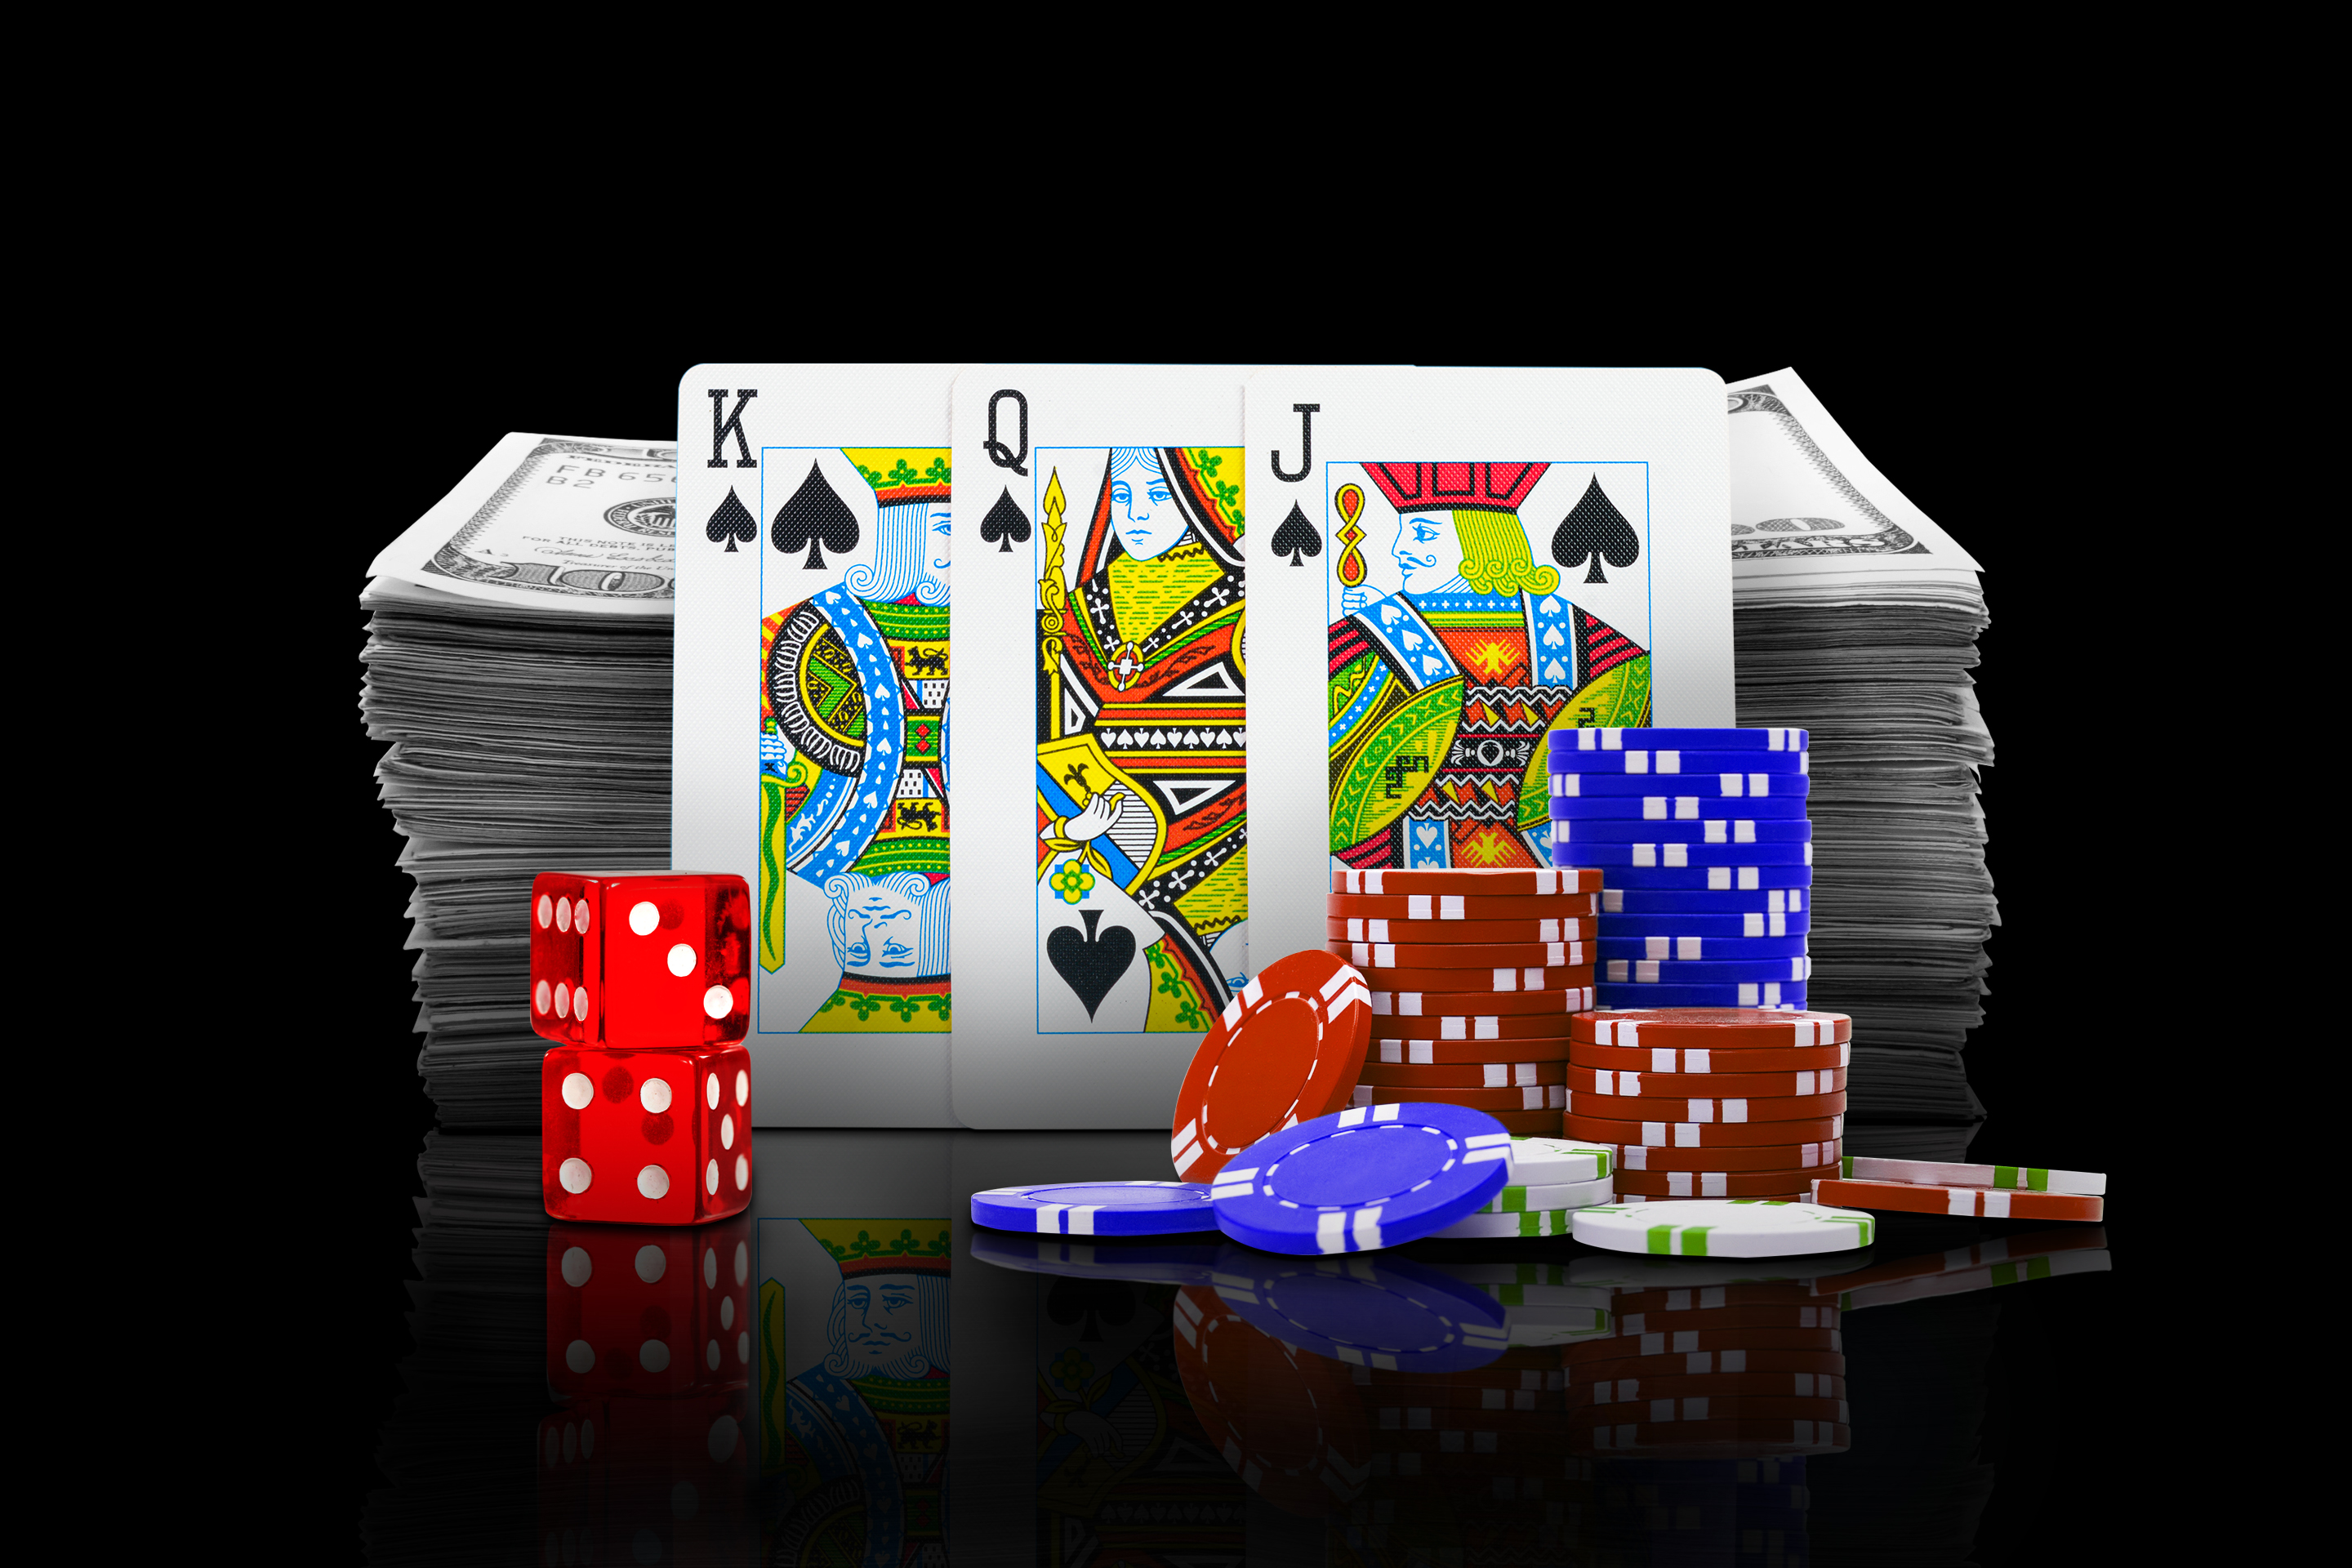 casinoLike An Expert. Follow These 5 Steps To Get There